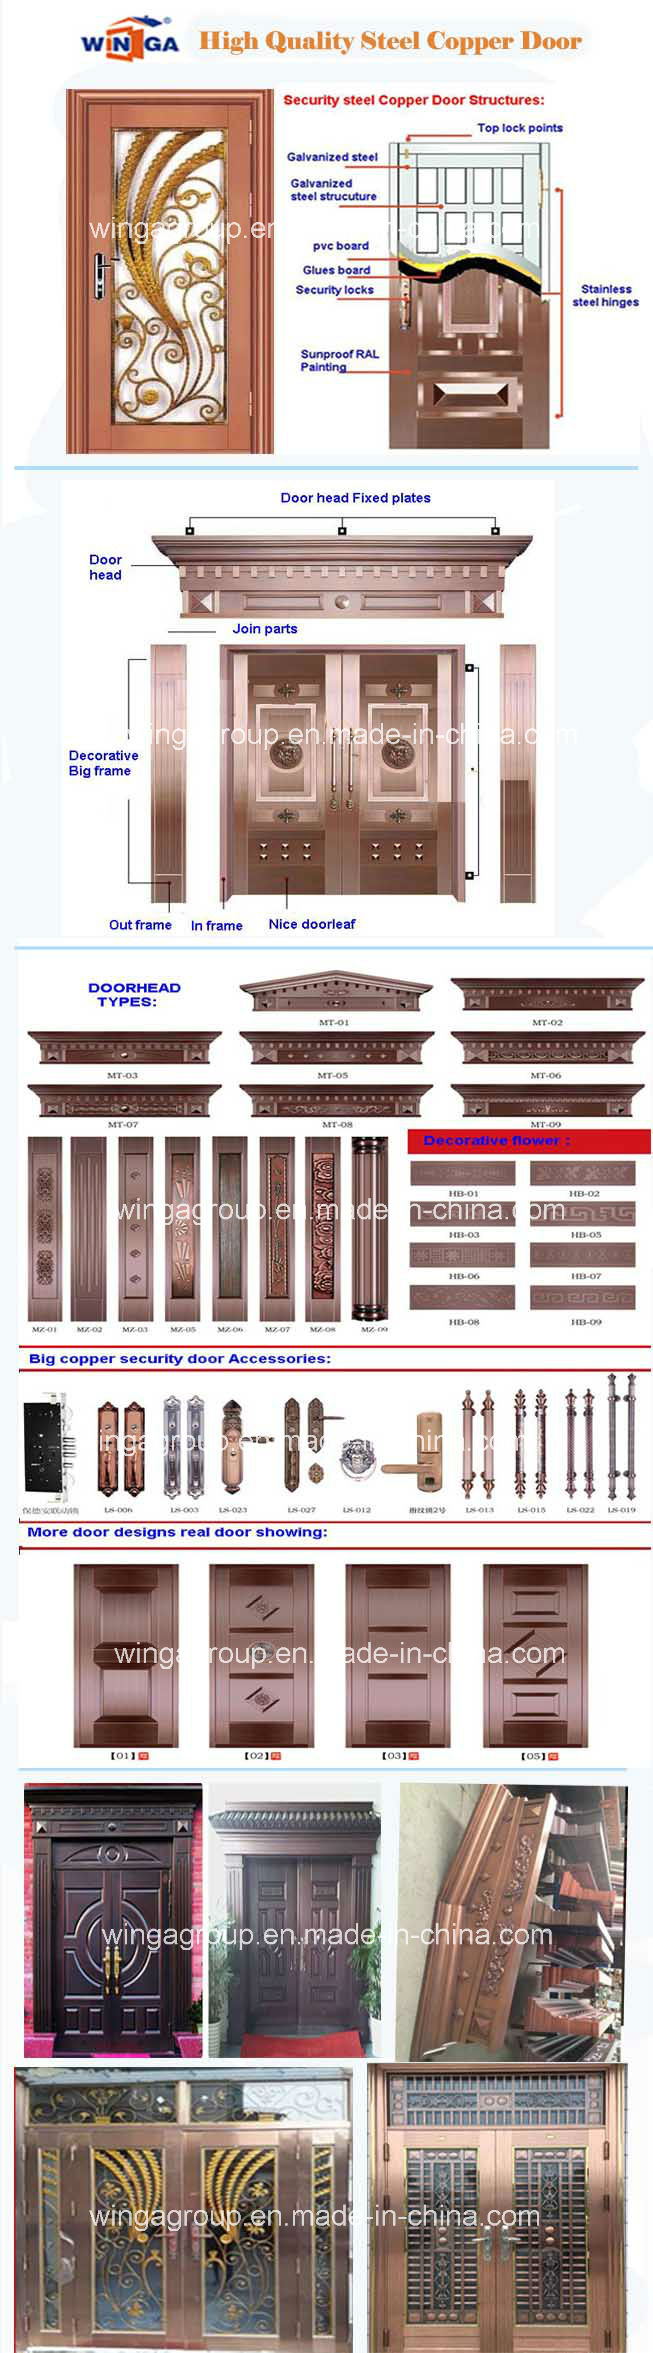 High Quality Security Metal Glass Copper Door (W-GB-15)